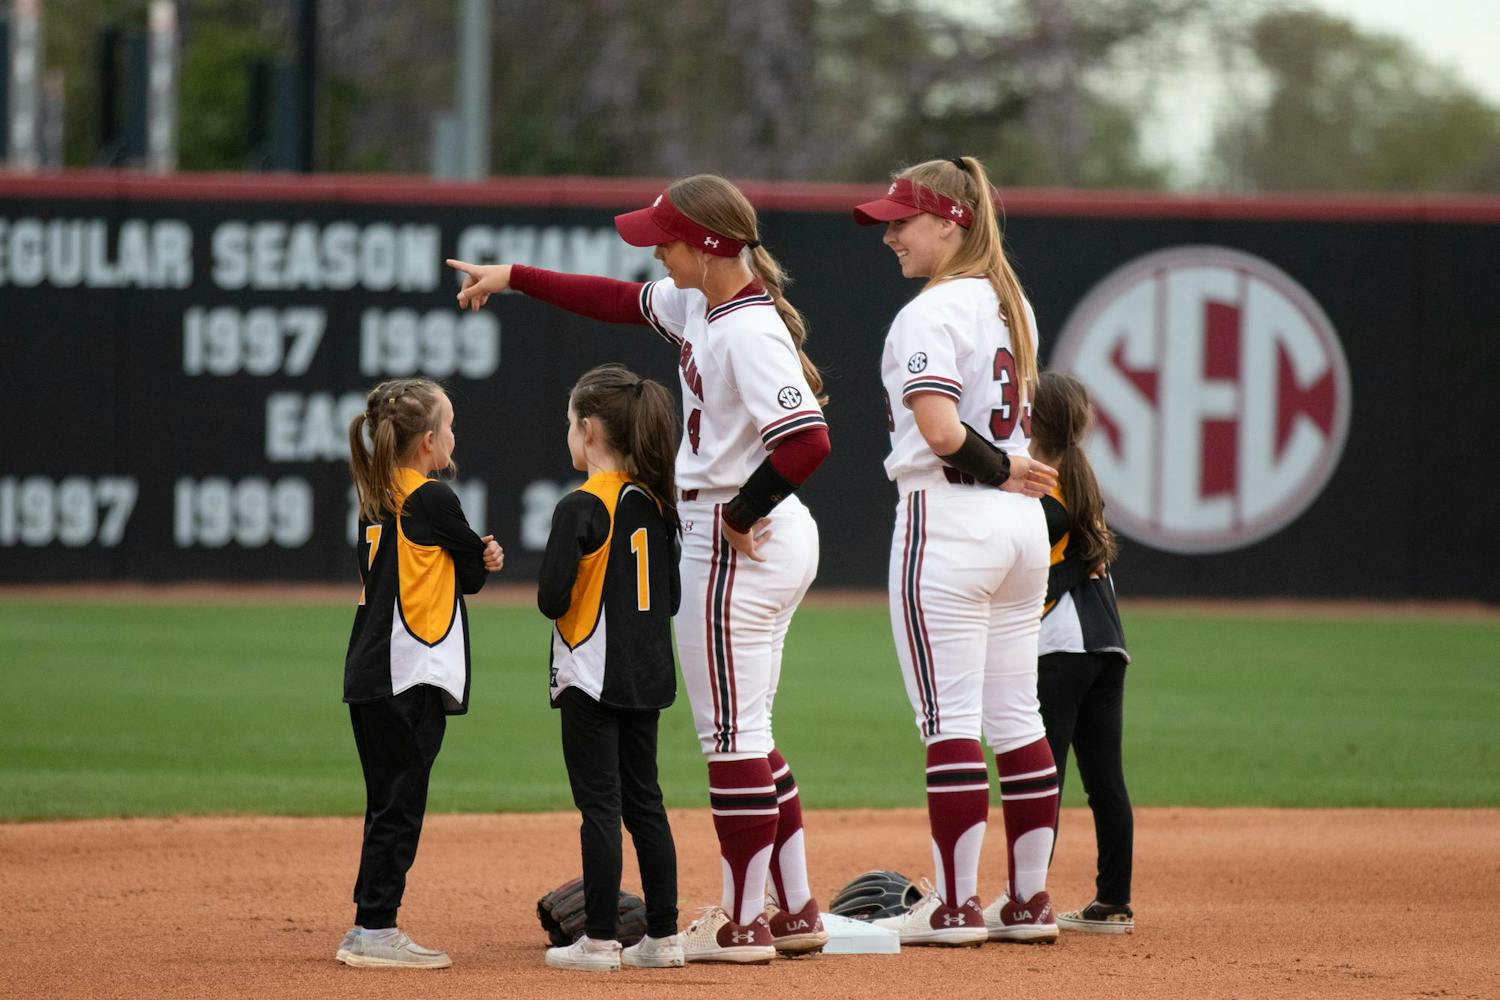 Junior infielder Brooke Blankenship (left) and freshman infielder Karley Shelton (right) stand on the field with members of a junior softball team before a game on March 23, 2024. South Carolina is 22-9 on the season.